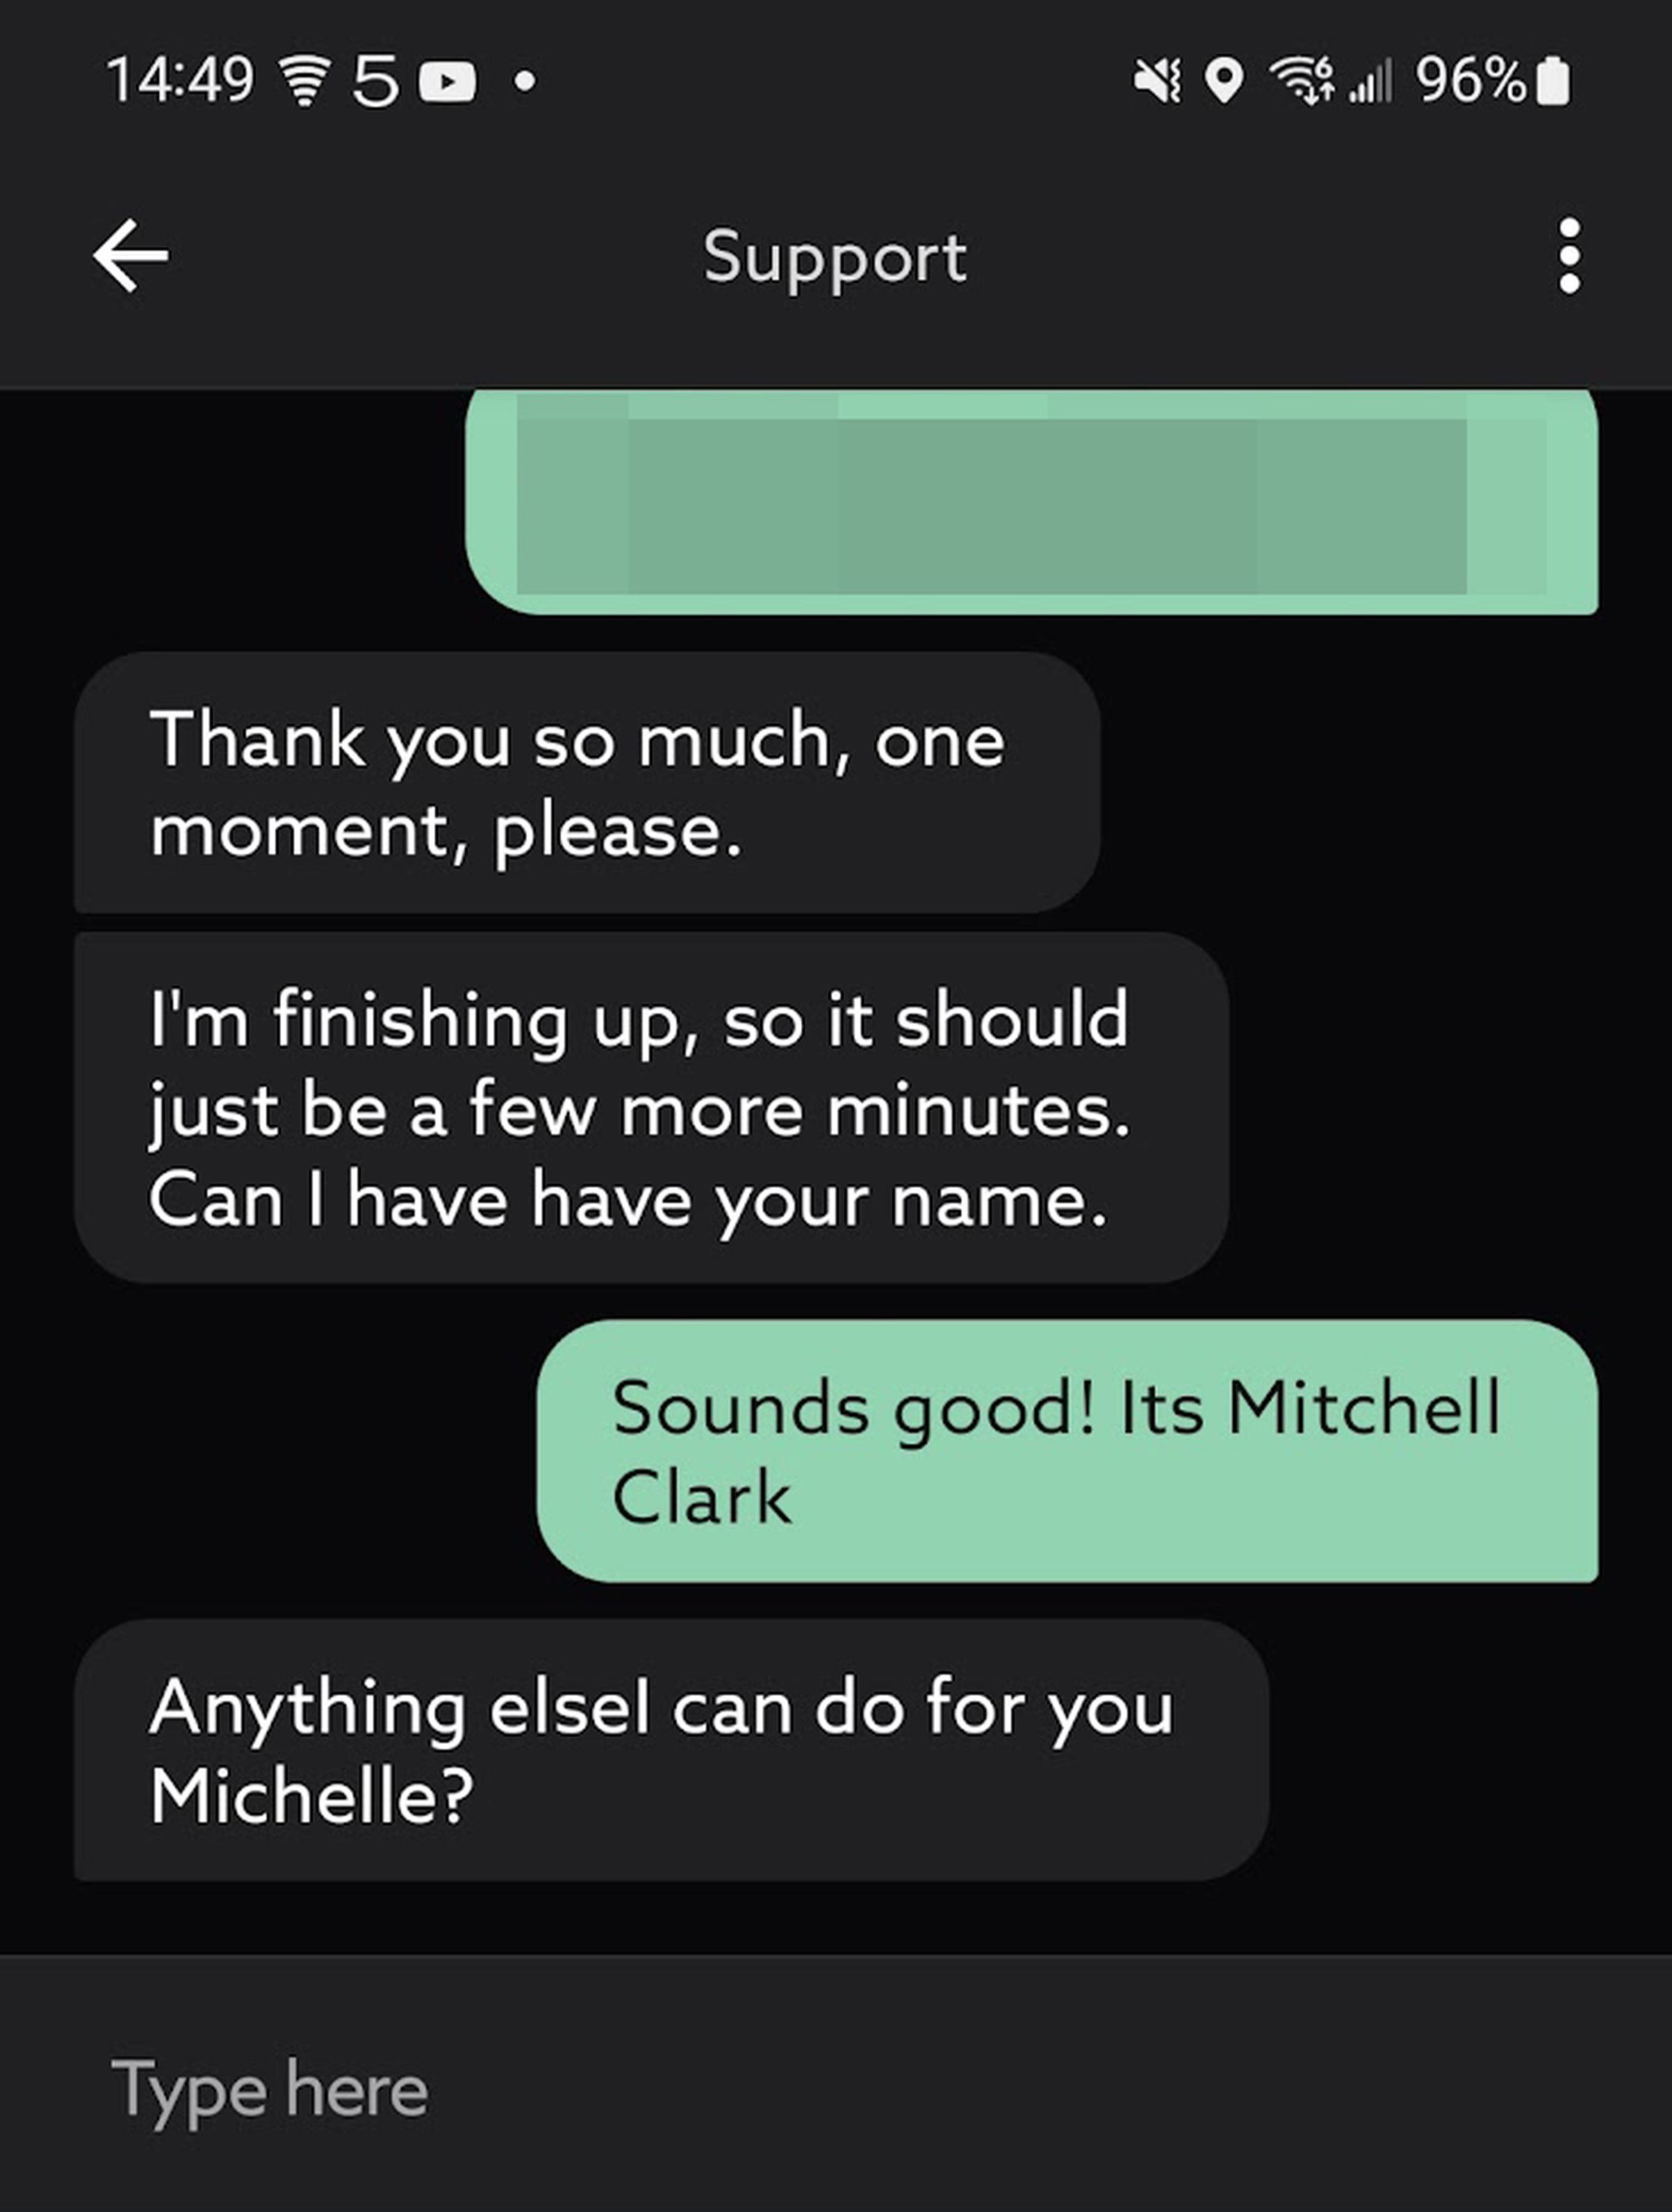 Image of a chat window. The support agent says “I’m finishing up, so it should just be a few more minutes. Can I have have your name.” The customer replies “Sounds good! It’s Mitchell Clark.” The support person replies “Anything elseI can do for you Michelle?”